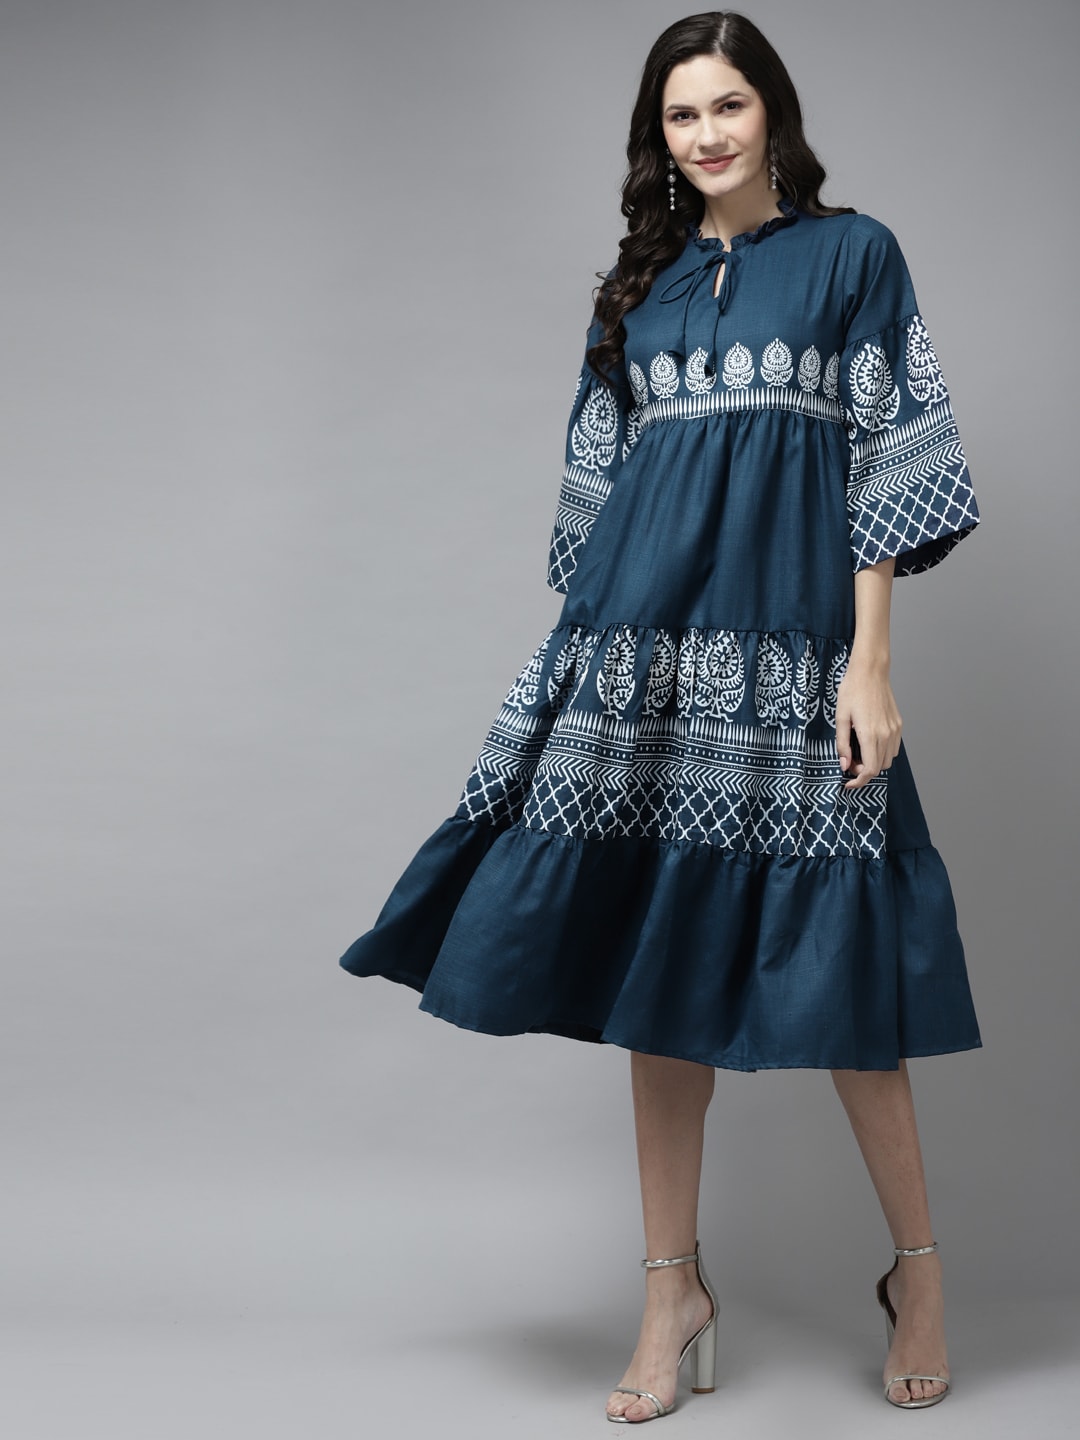 Bhama Couture Teal Blue & White Ethnic Motifs Tie-Up Neck Ethnic Midi Dress Price in India